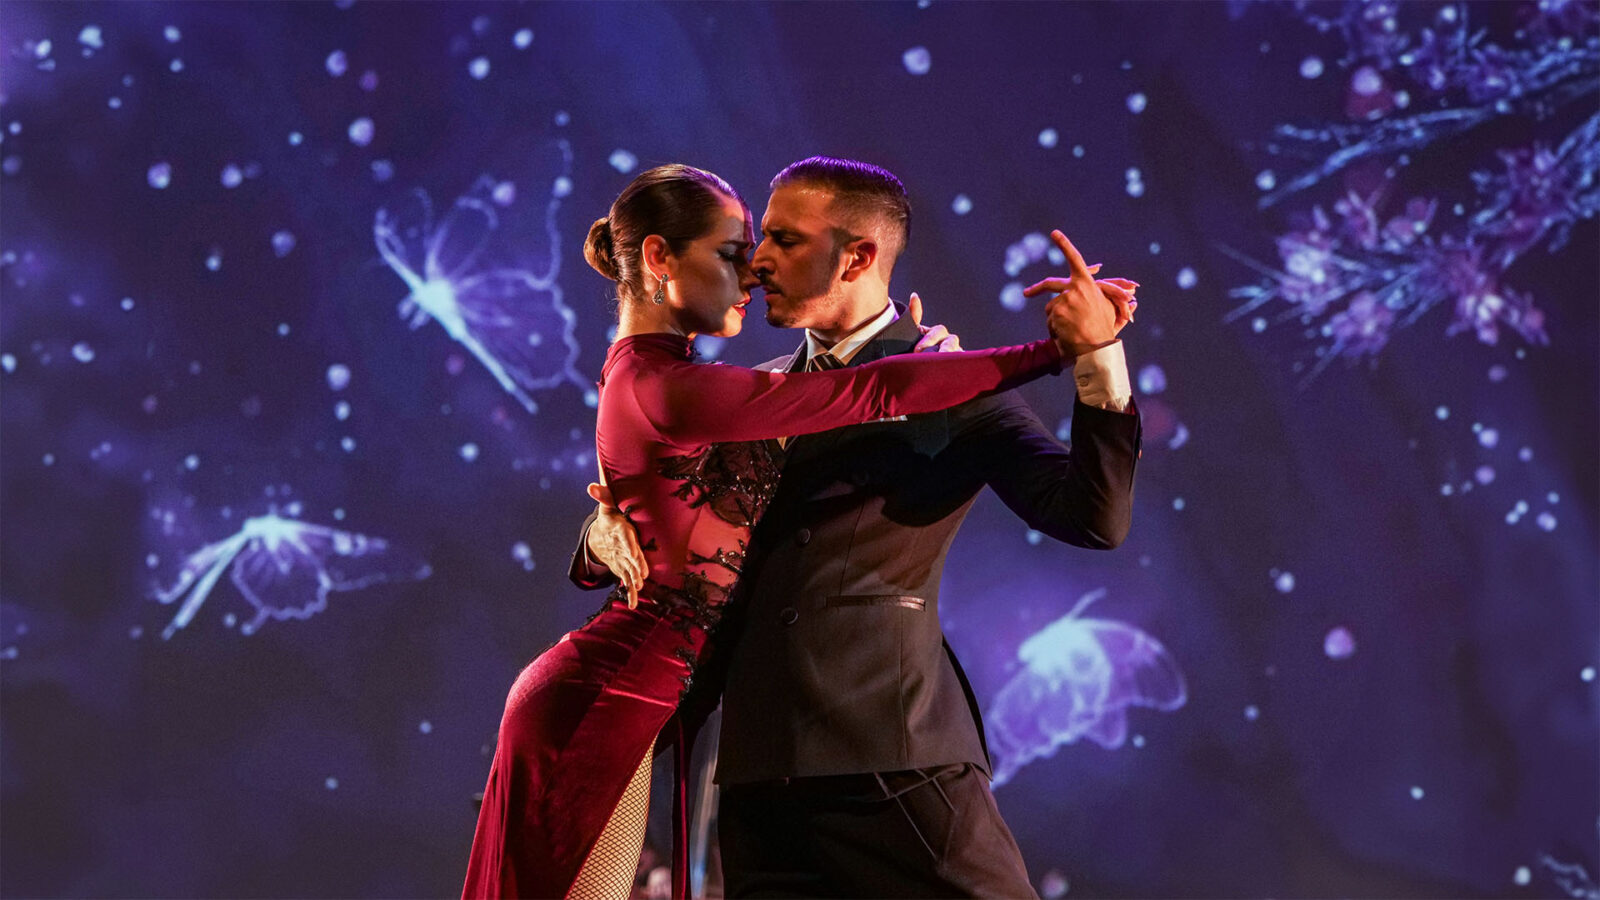 A pair of dancers, a man and a woman, are performing a passionate tango on stage. The woman is wearing a deep red, long-sleeved dress with black lace details, and her hair is styled in a sleek bun. The man is dressed in a formal black suit with a white shirt. They are dancing closely, with intense expressions and the man's arm wrapped around the woman's back. The background is dark with a digital projection of ethereal, glowing butterflies and sparkling particles, creating a dreamy atmosphere.